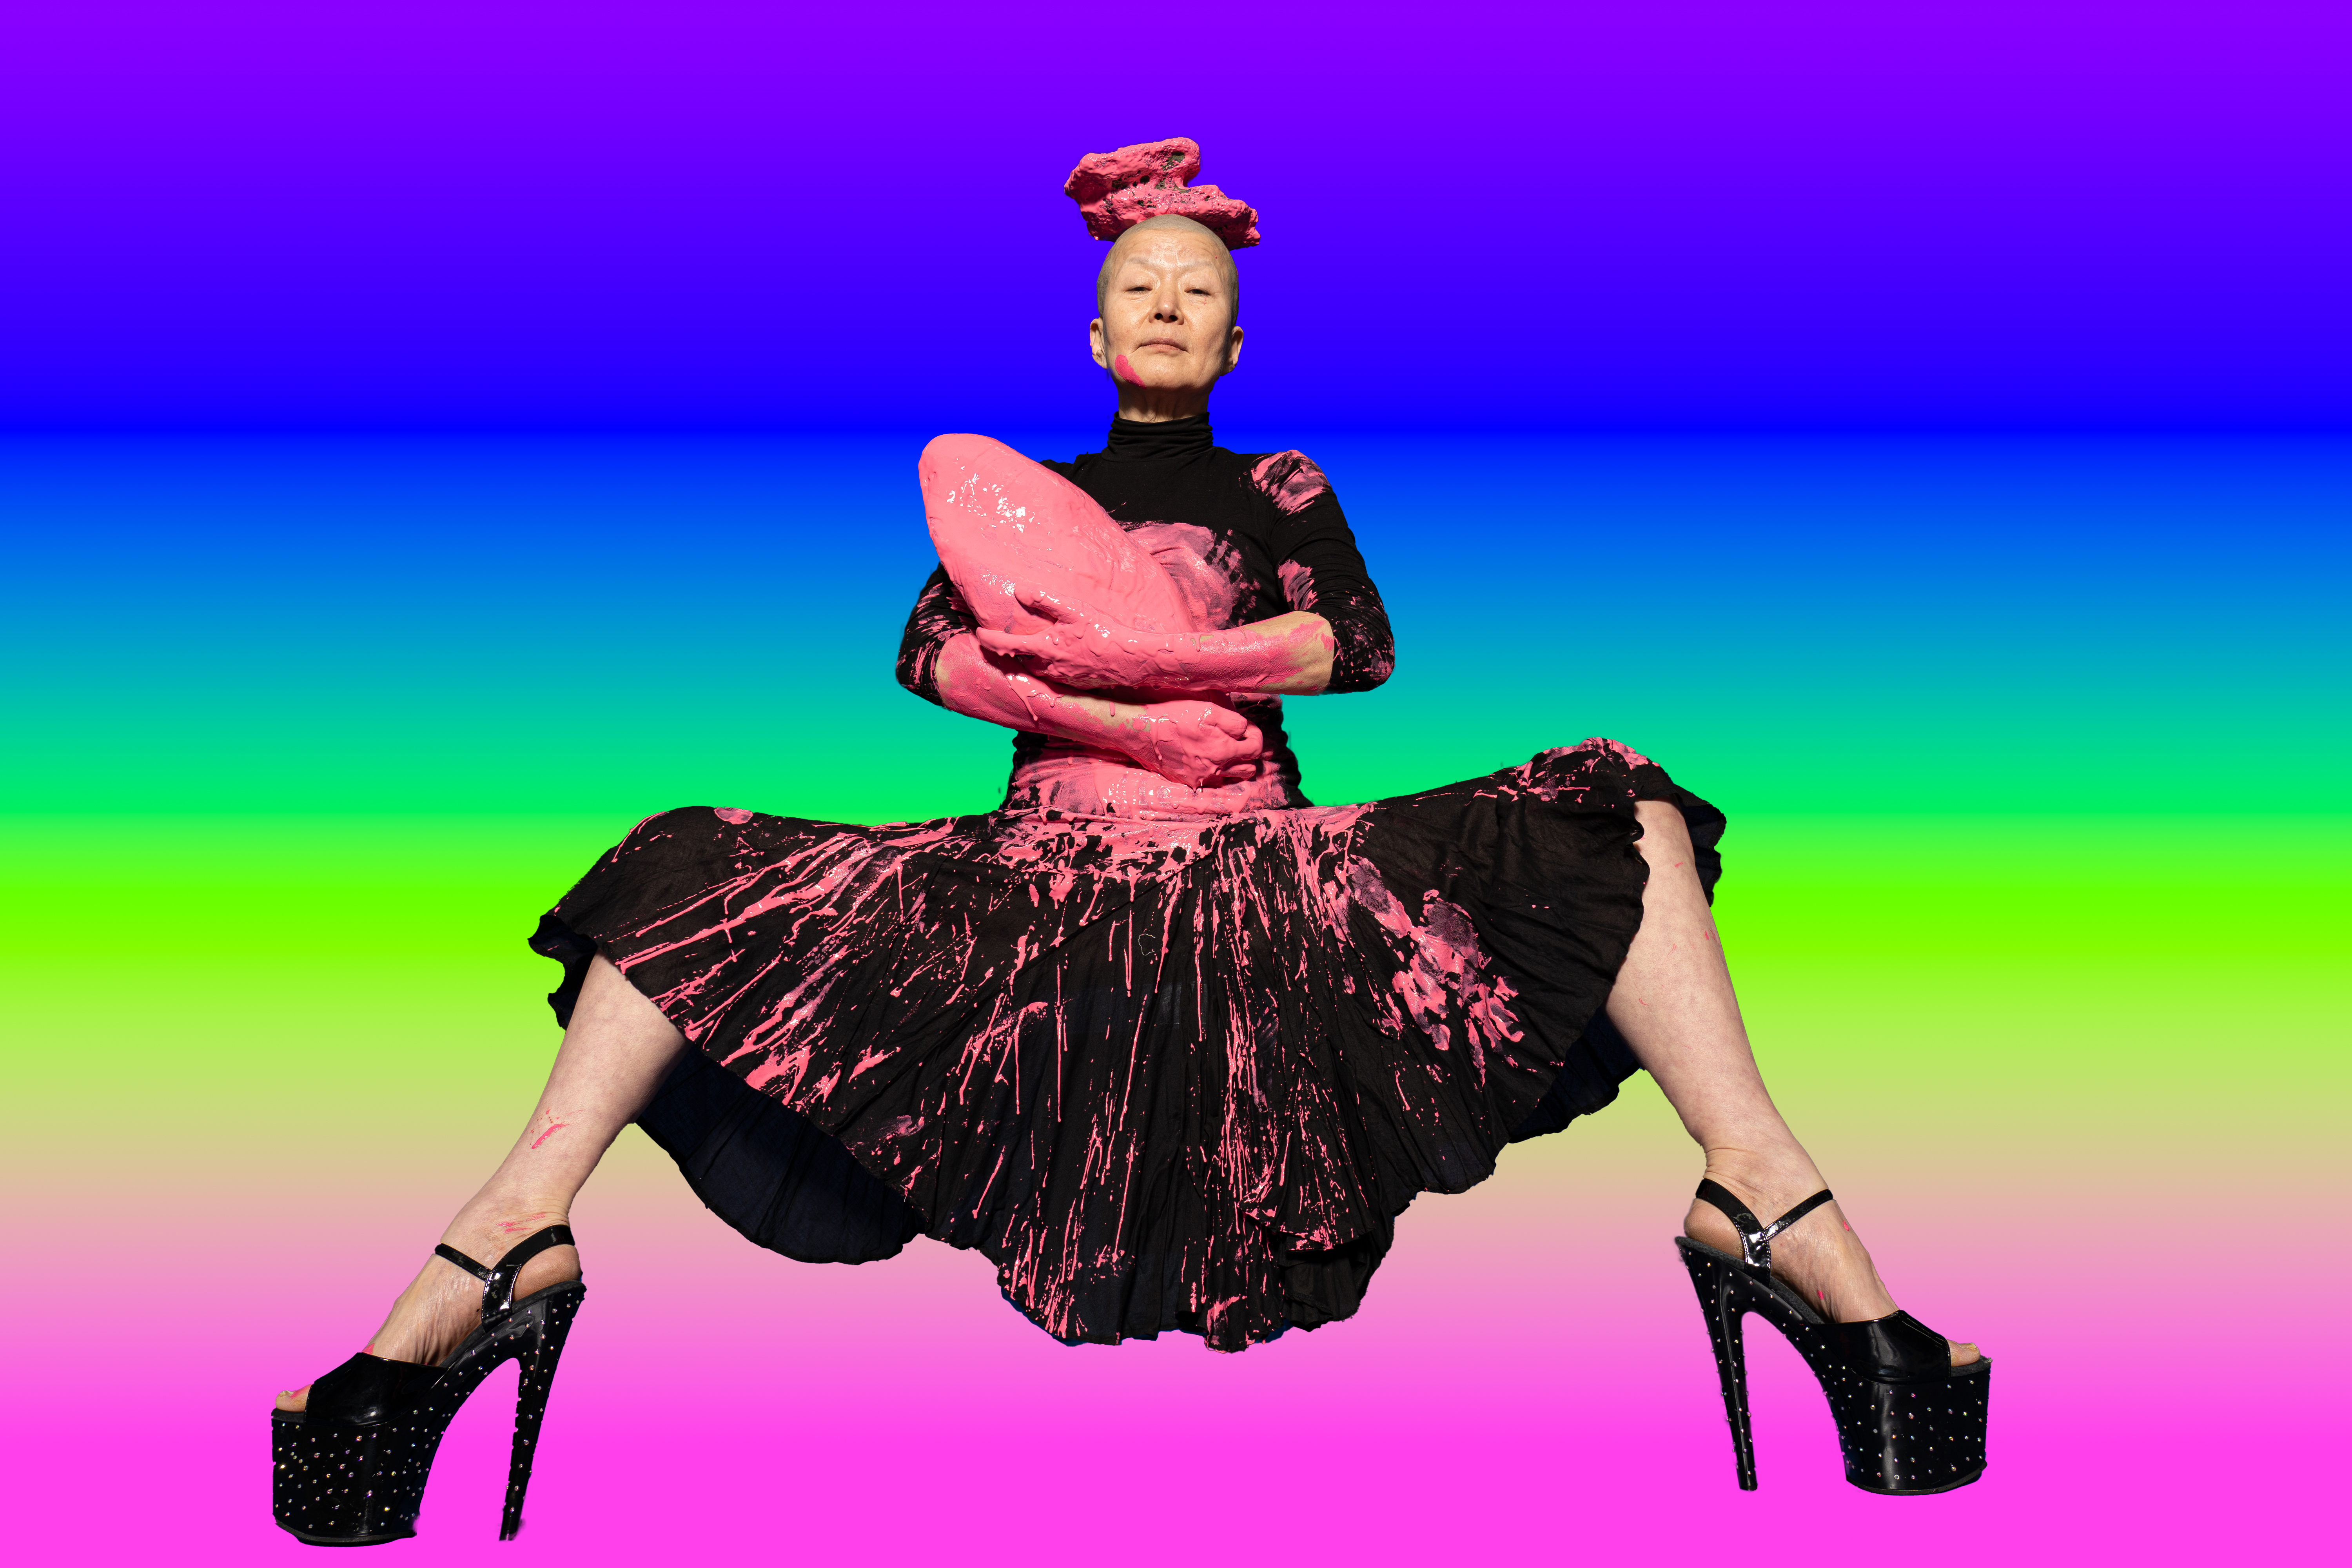 Eun-Me Ahn - sitting on a rainbow background wearing platform heels and a black dress with pink paint all over her